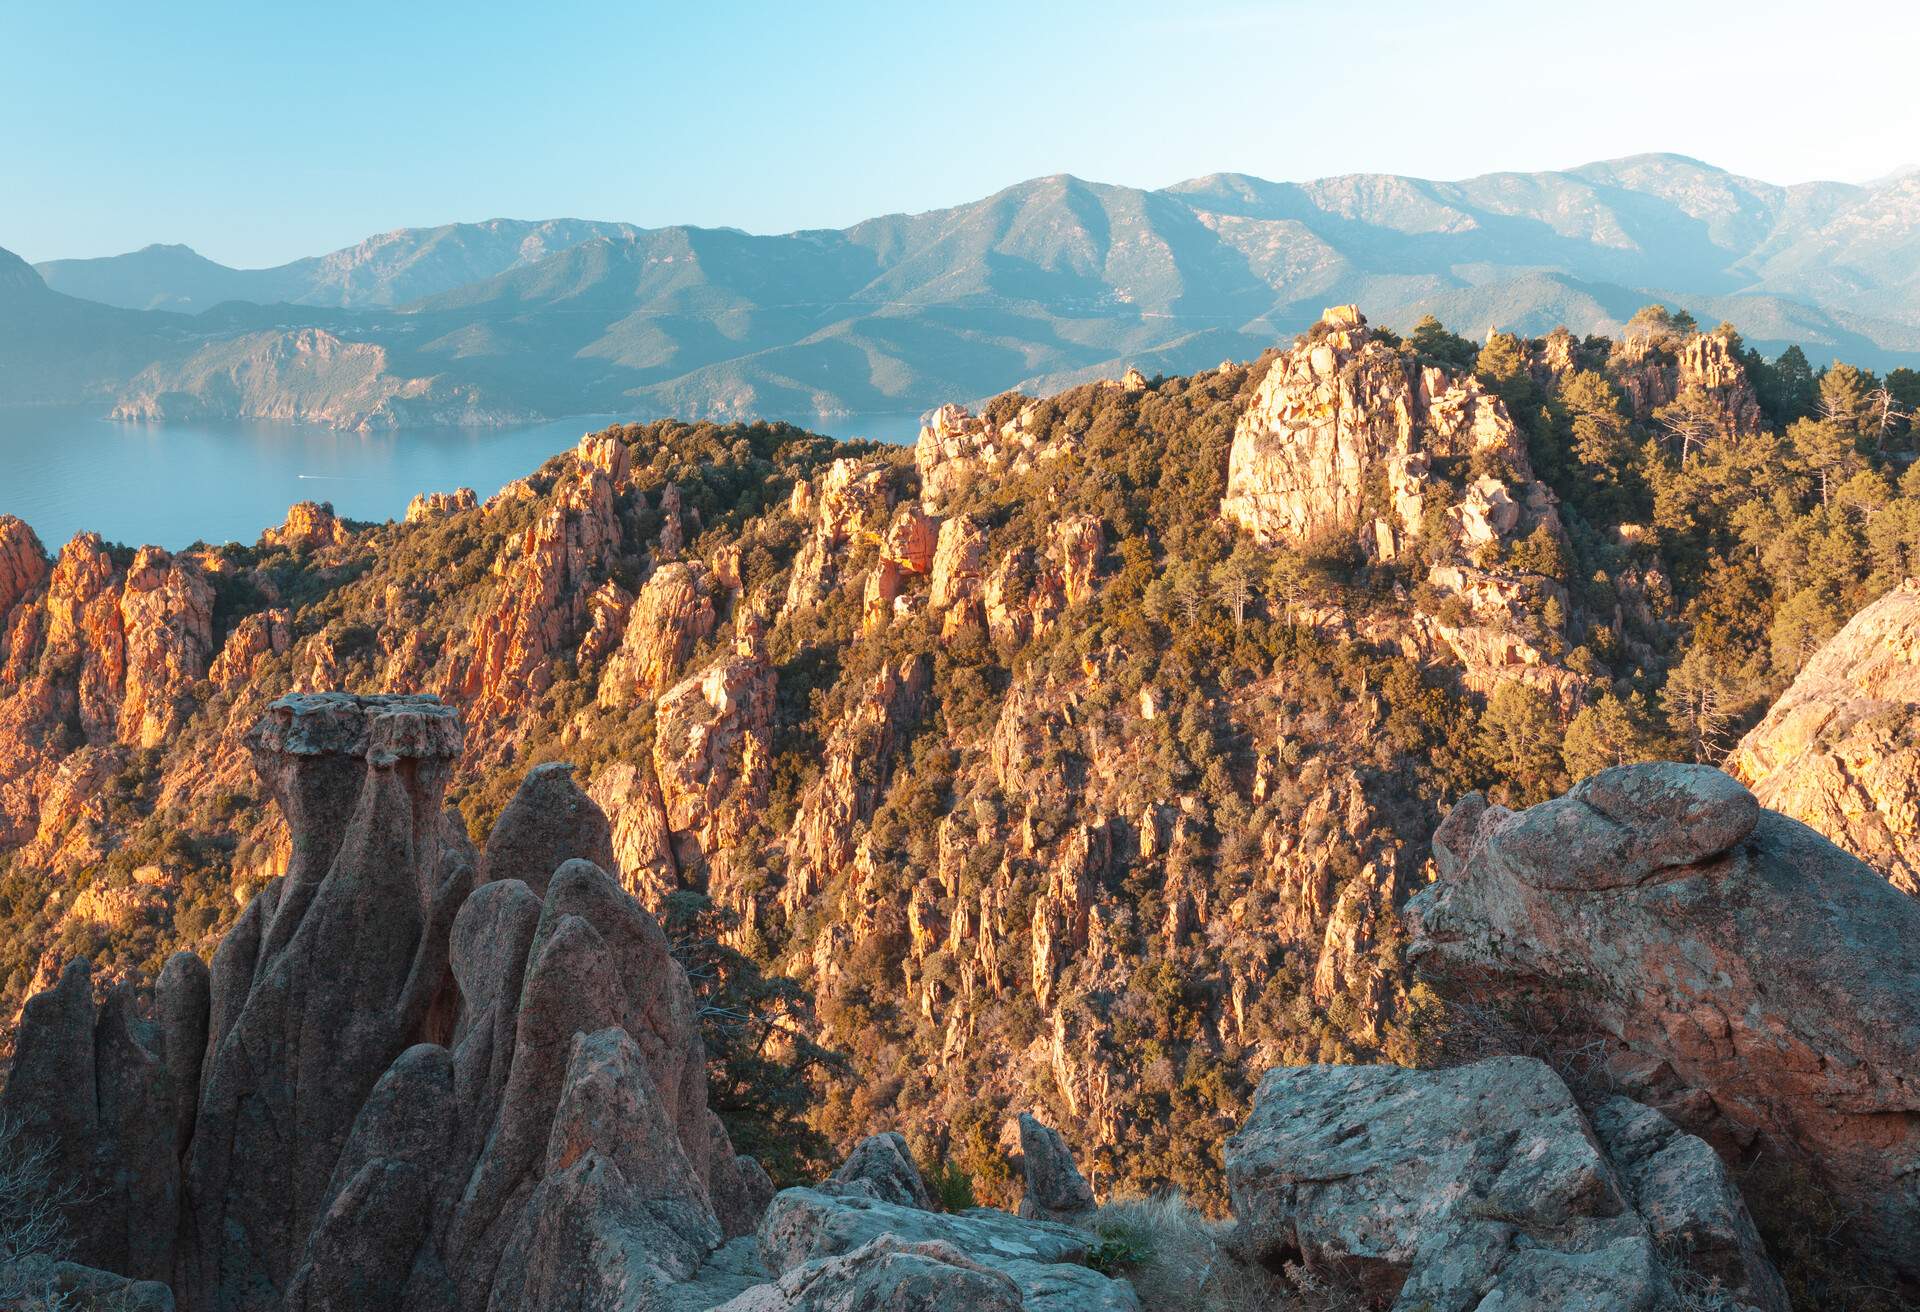 Late afternoon at Calanques de Piana in Corsica, France